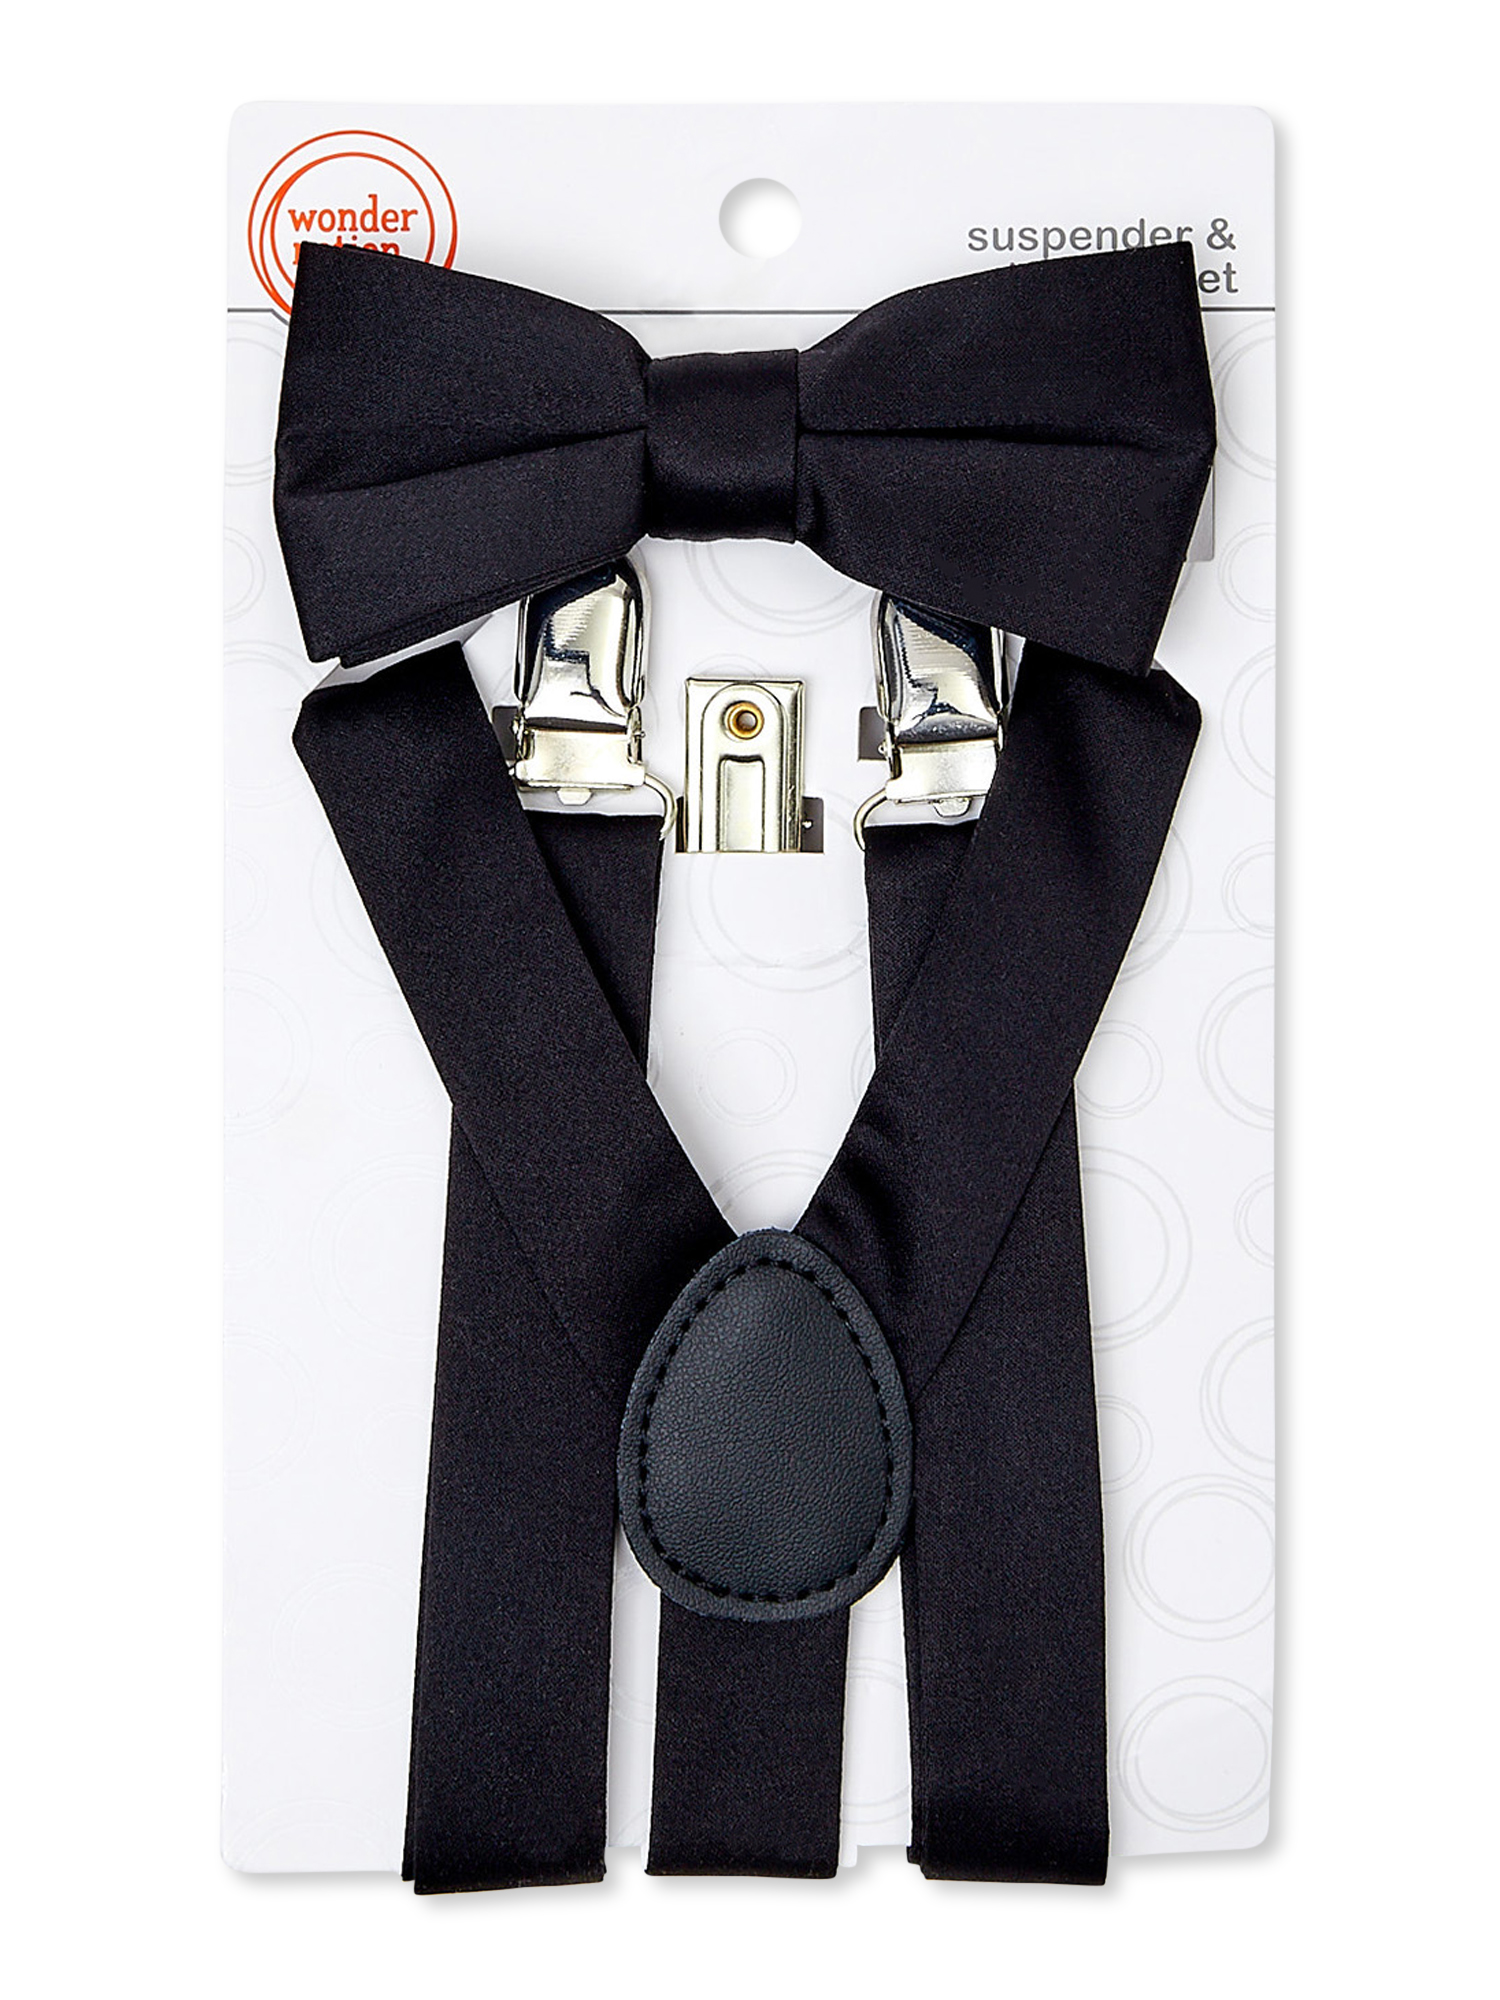 Wonder Nation Boys Suspenders and Bow Tie Set, 2-Piece - image 2 of 2